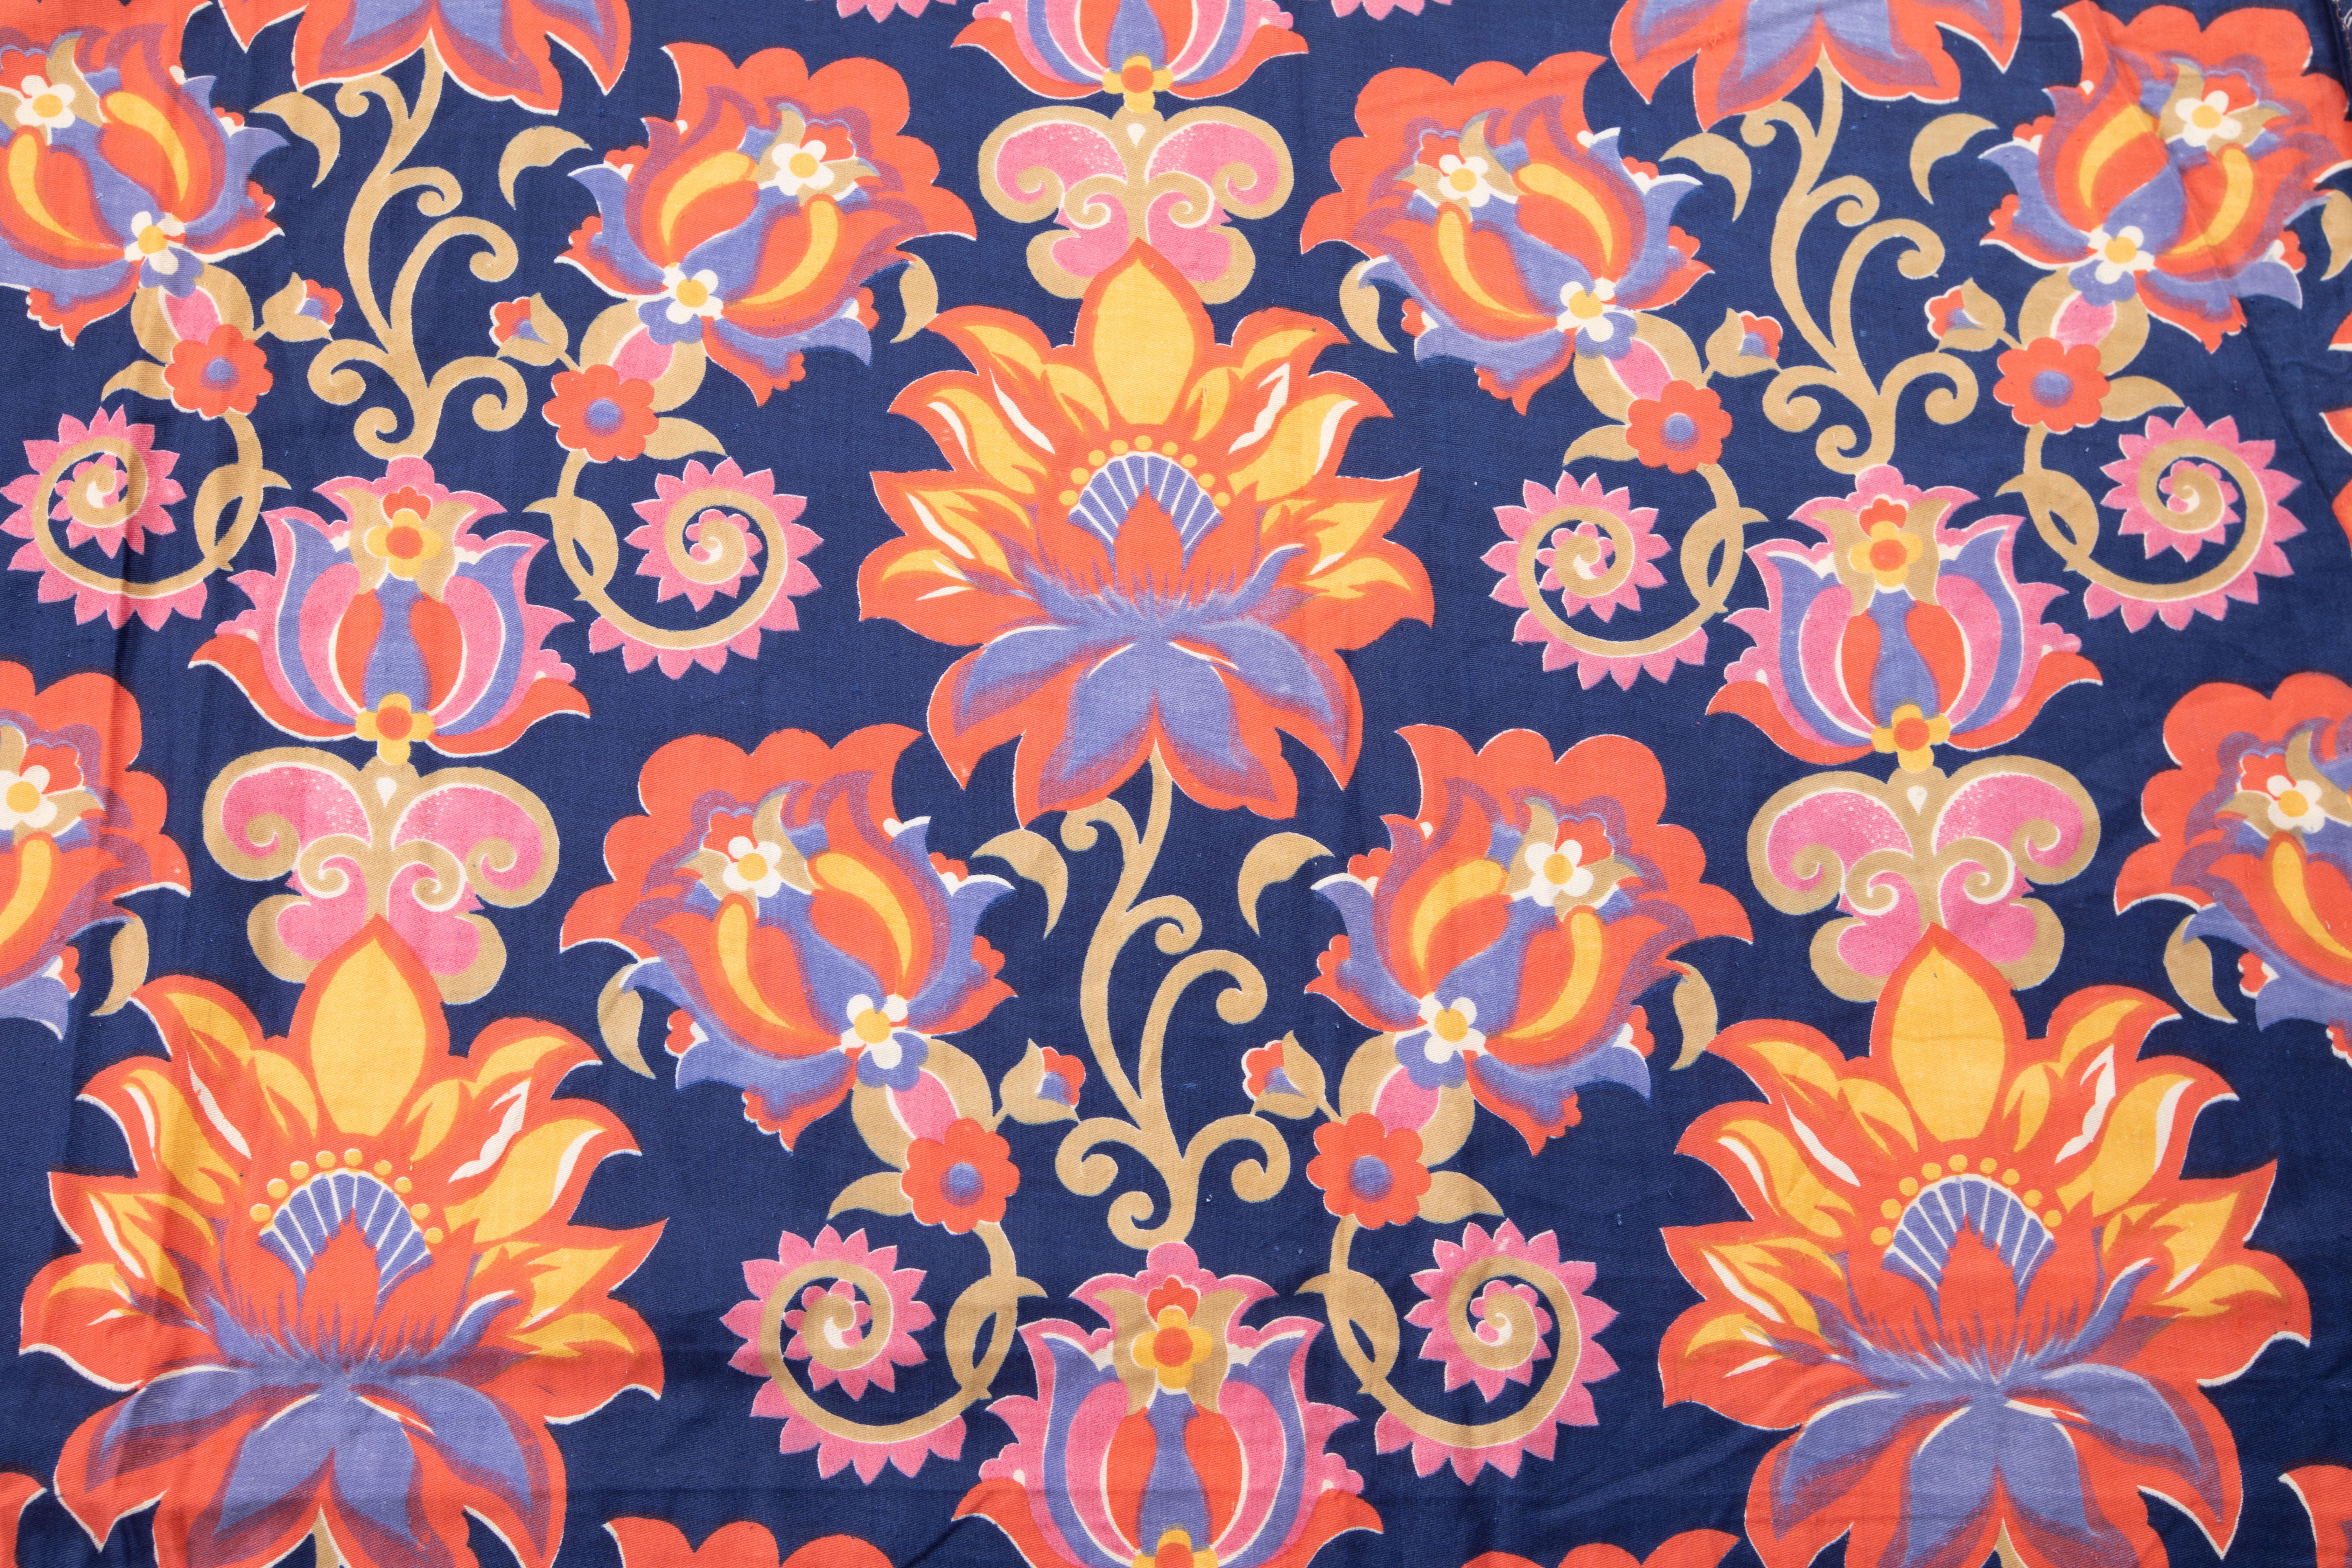 Russian Roller Printed Cotton Fabric Panel, Mid-20th Century or Earlier For Sale 3